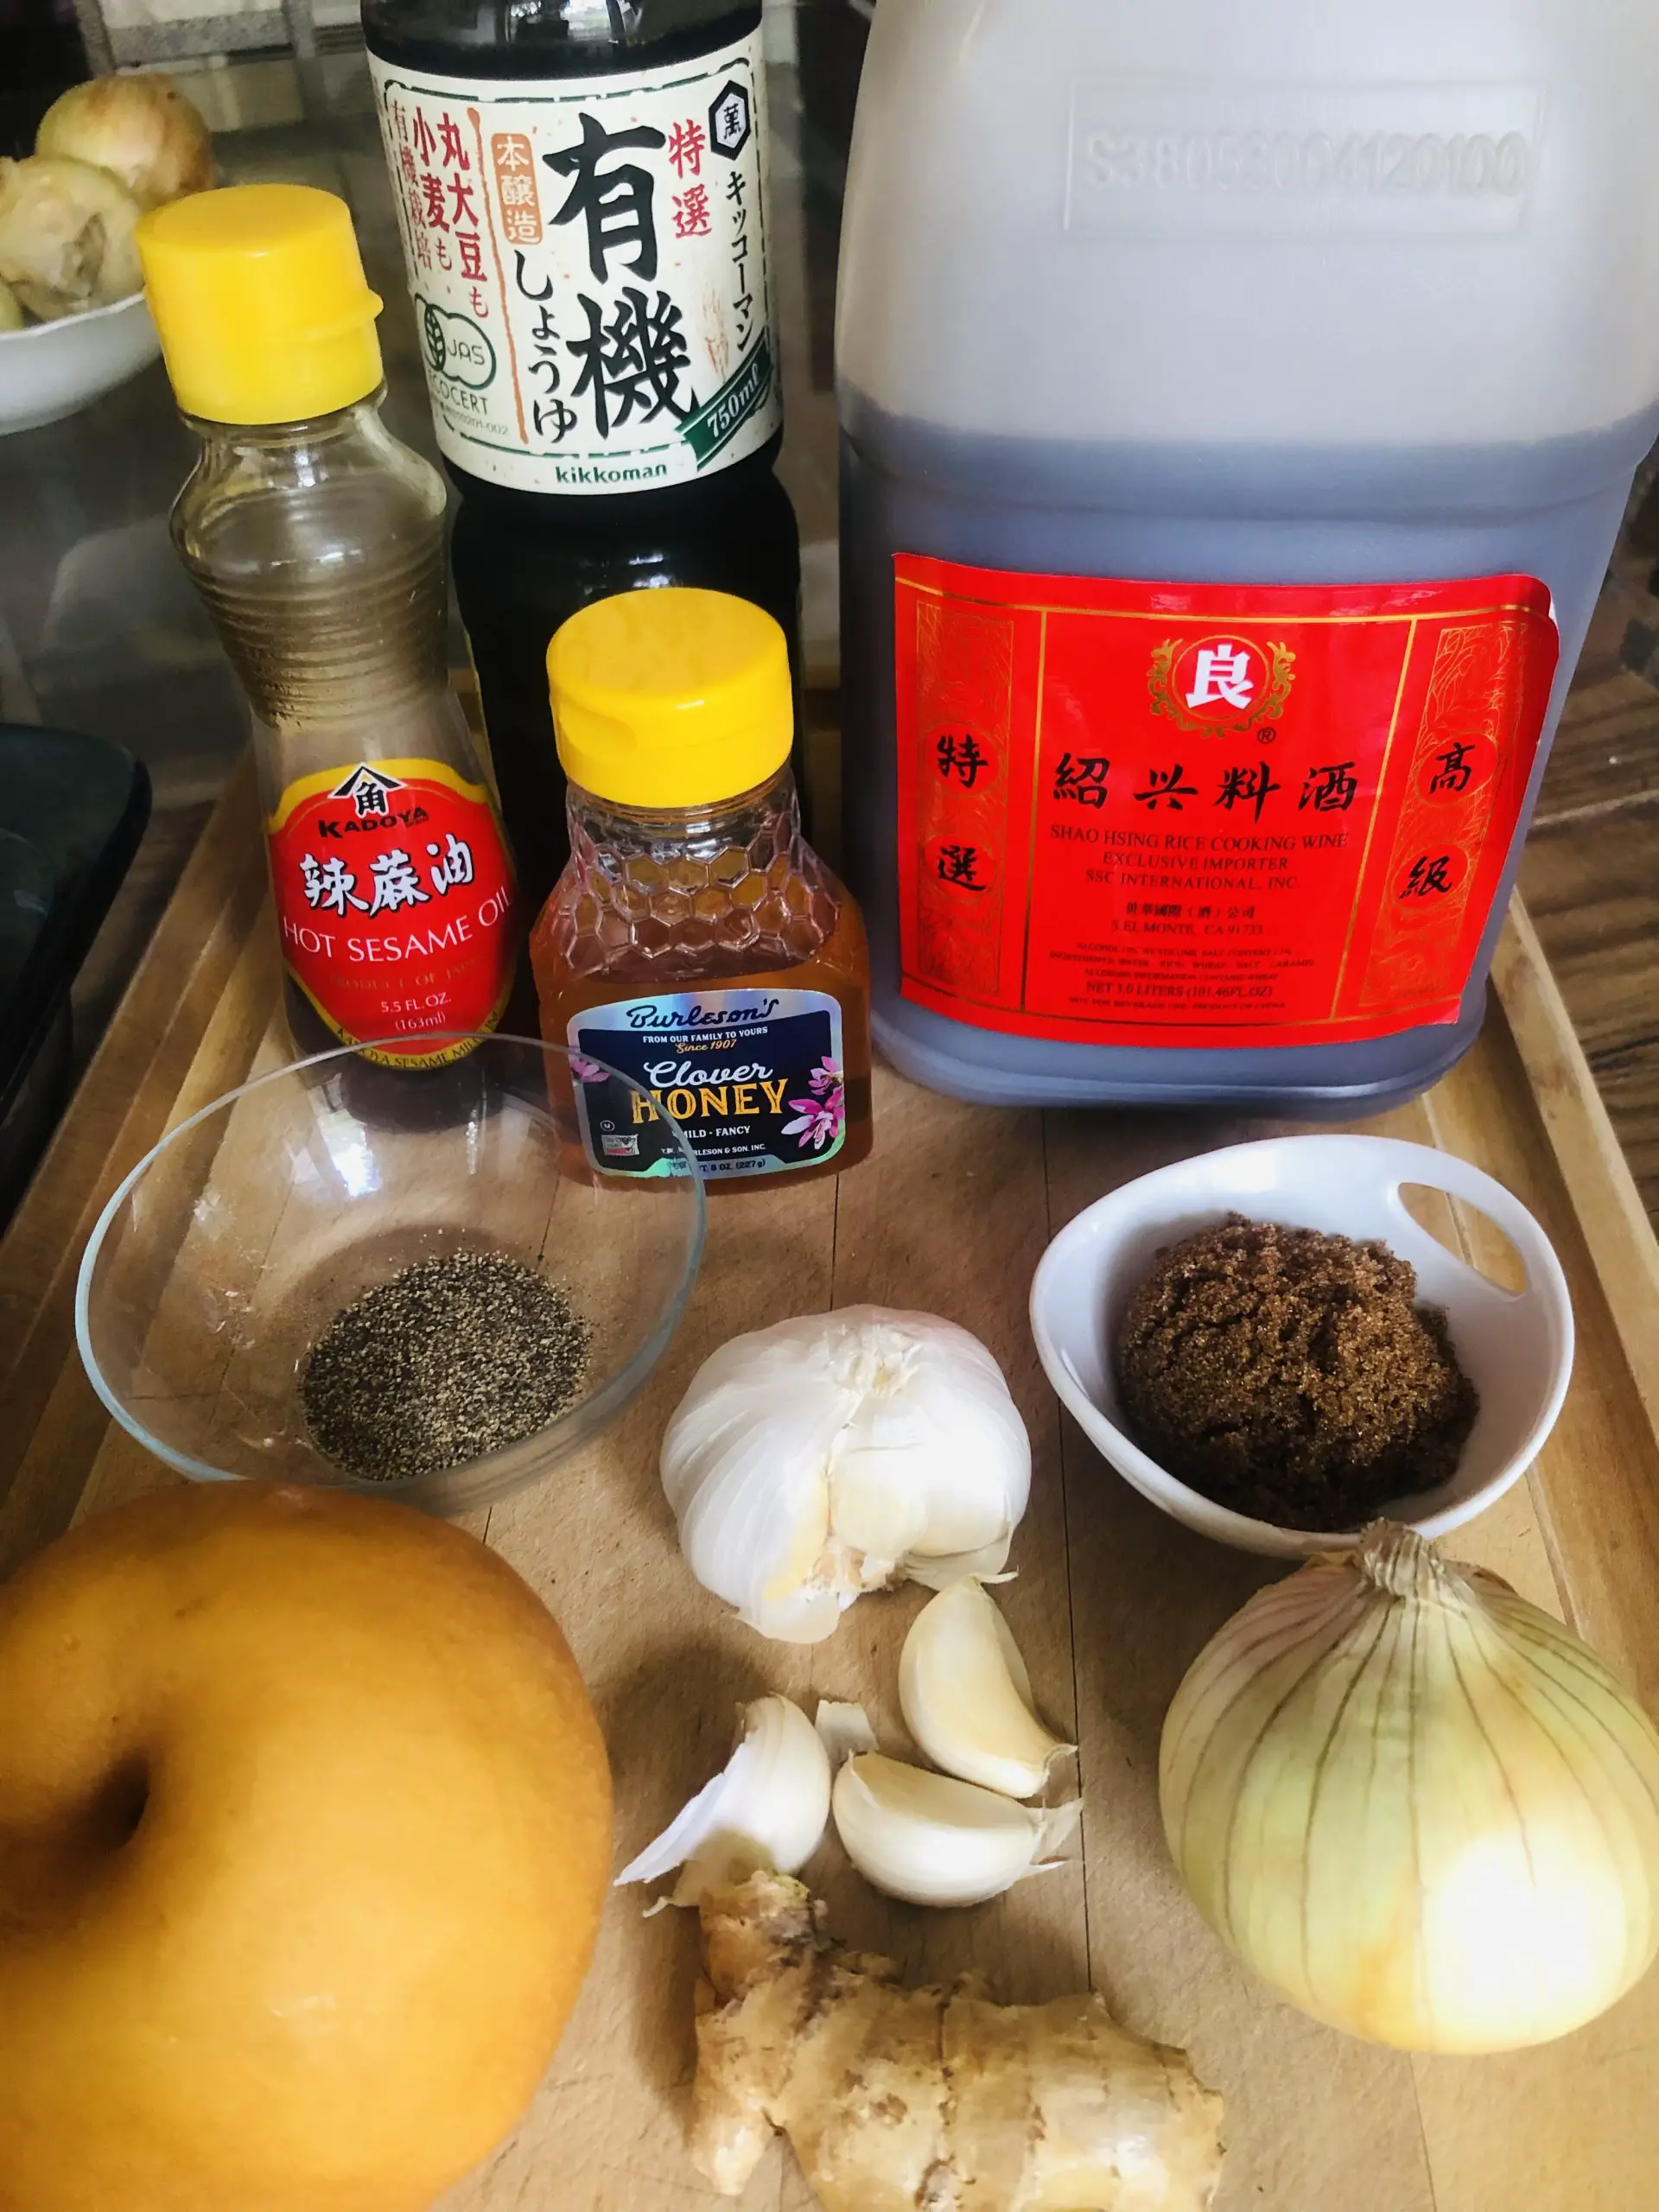 Asian pear, black pepper in a glass bow, ginger, garlic, onion, brown sugar in a white dish, Shaoxing rice wine, honey, hot sesame oil, and soy sauce